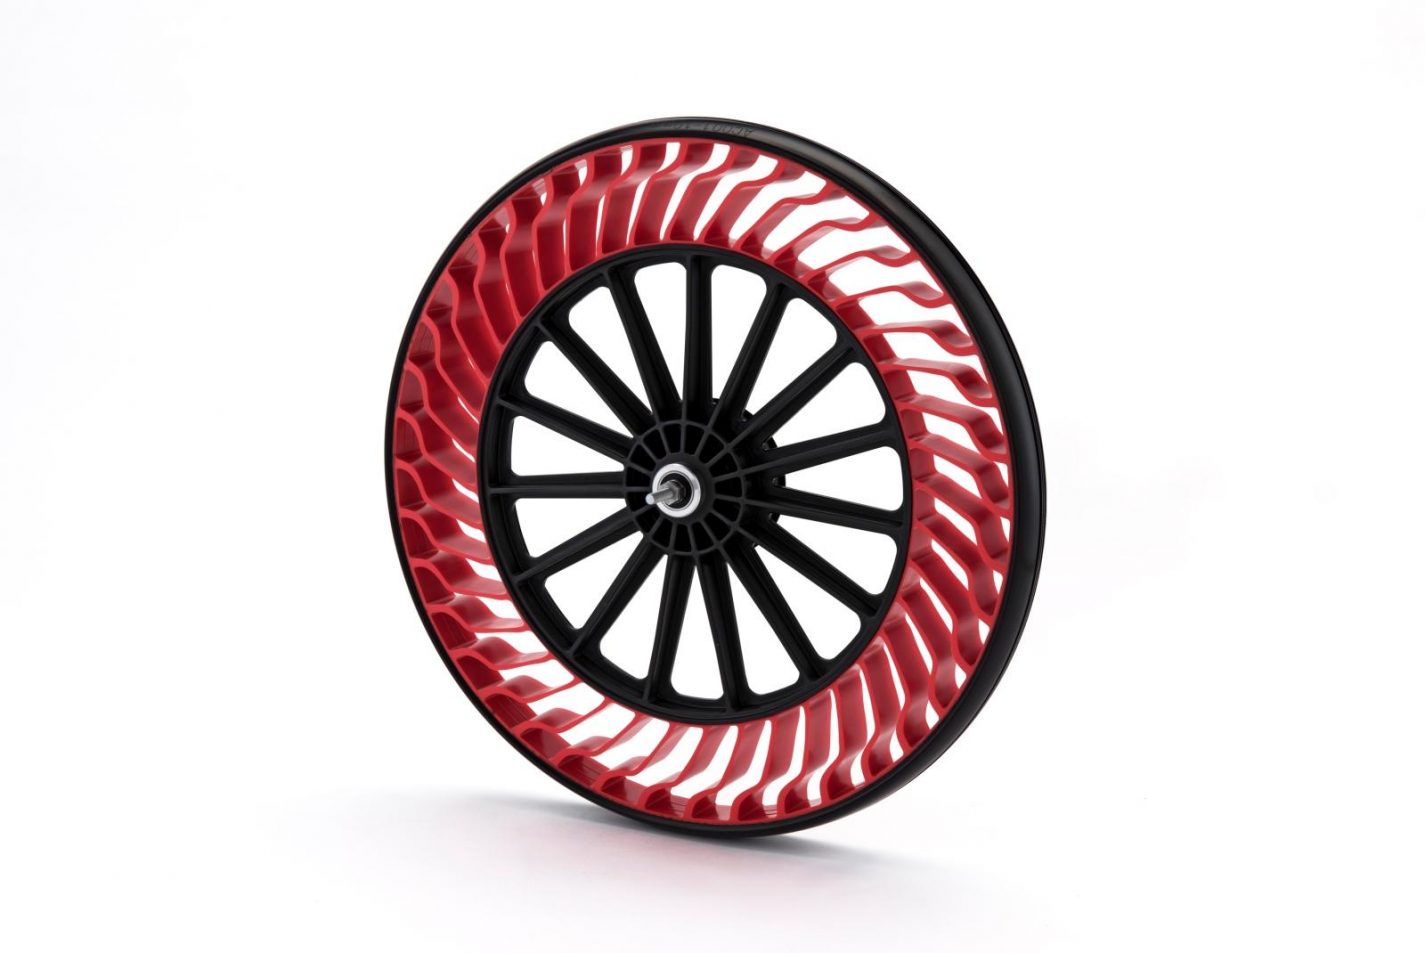 Thumbnail Credit (capovelo.com): the technology relies upon a unique structure of spokes stretching along the inner sides of tires